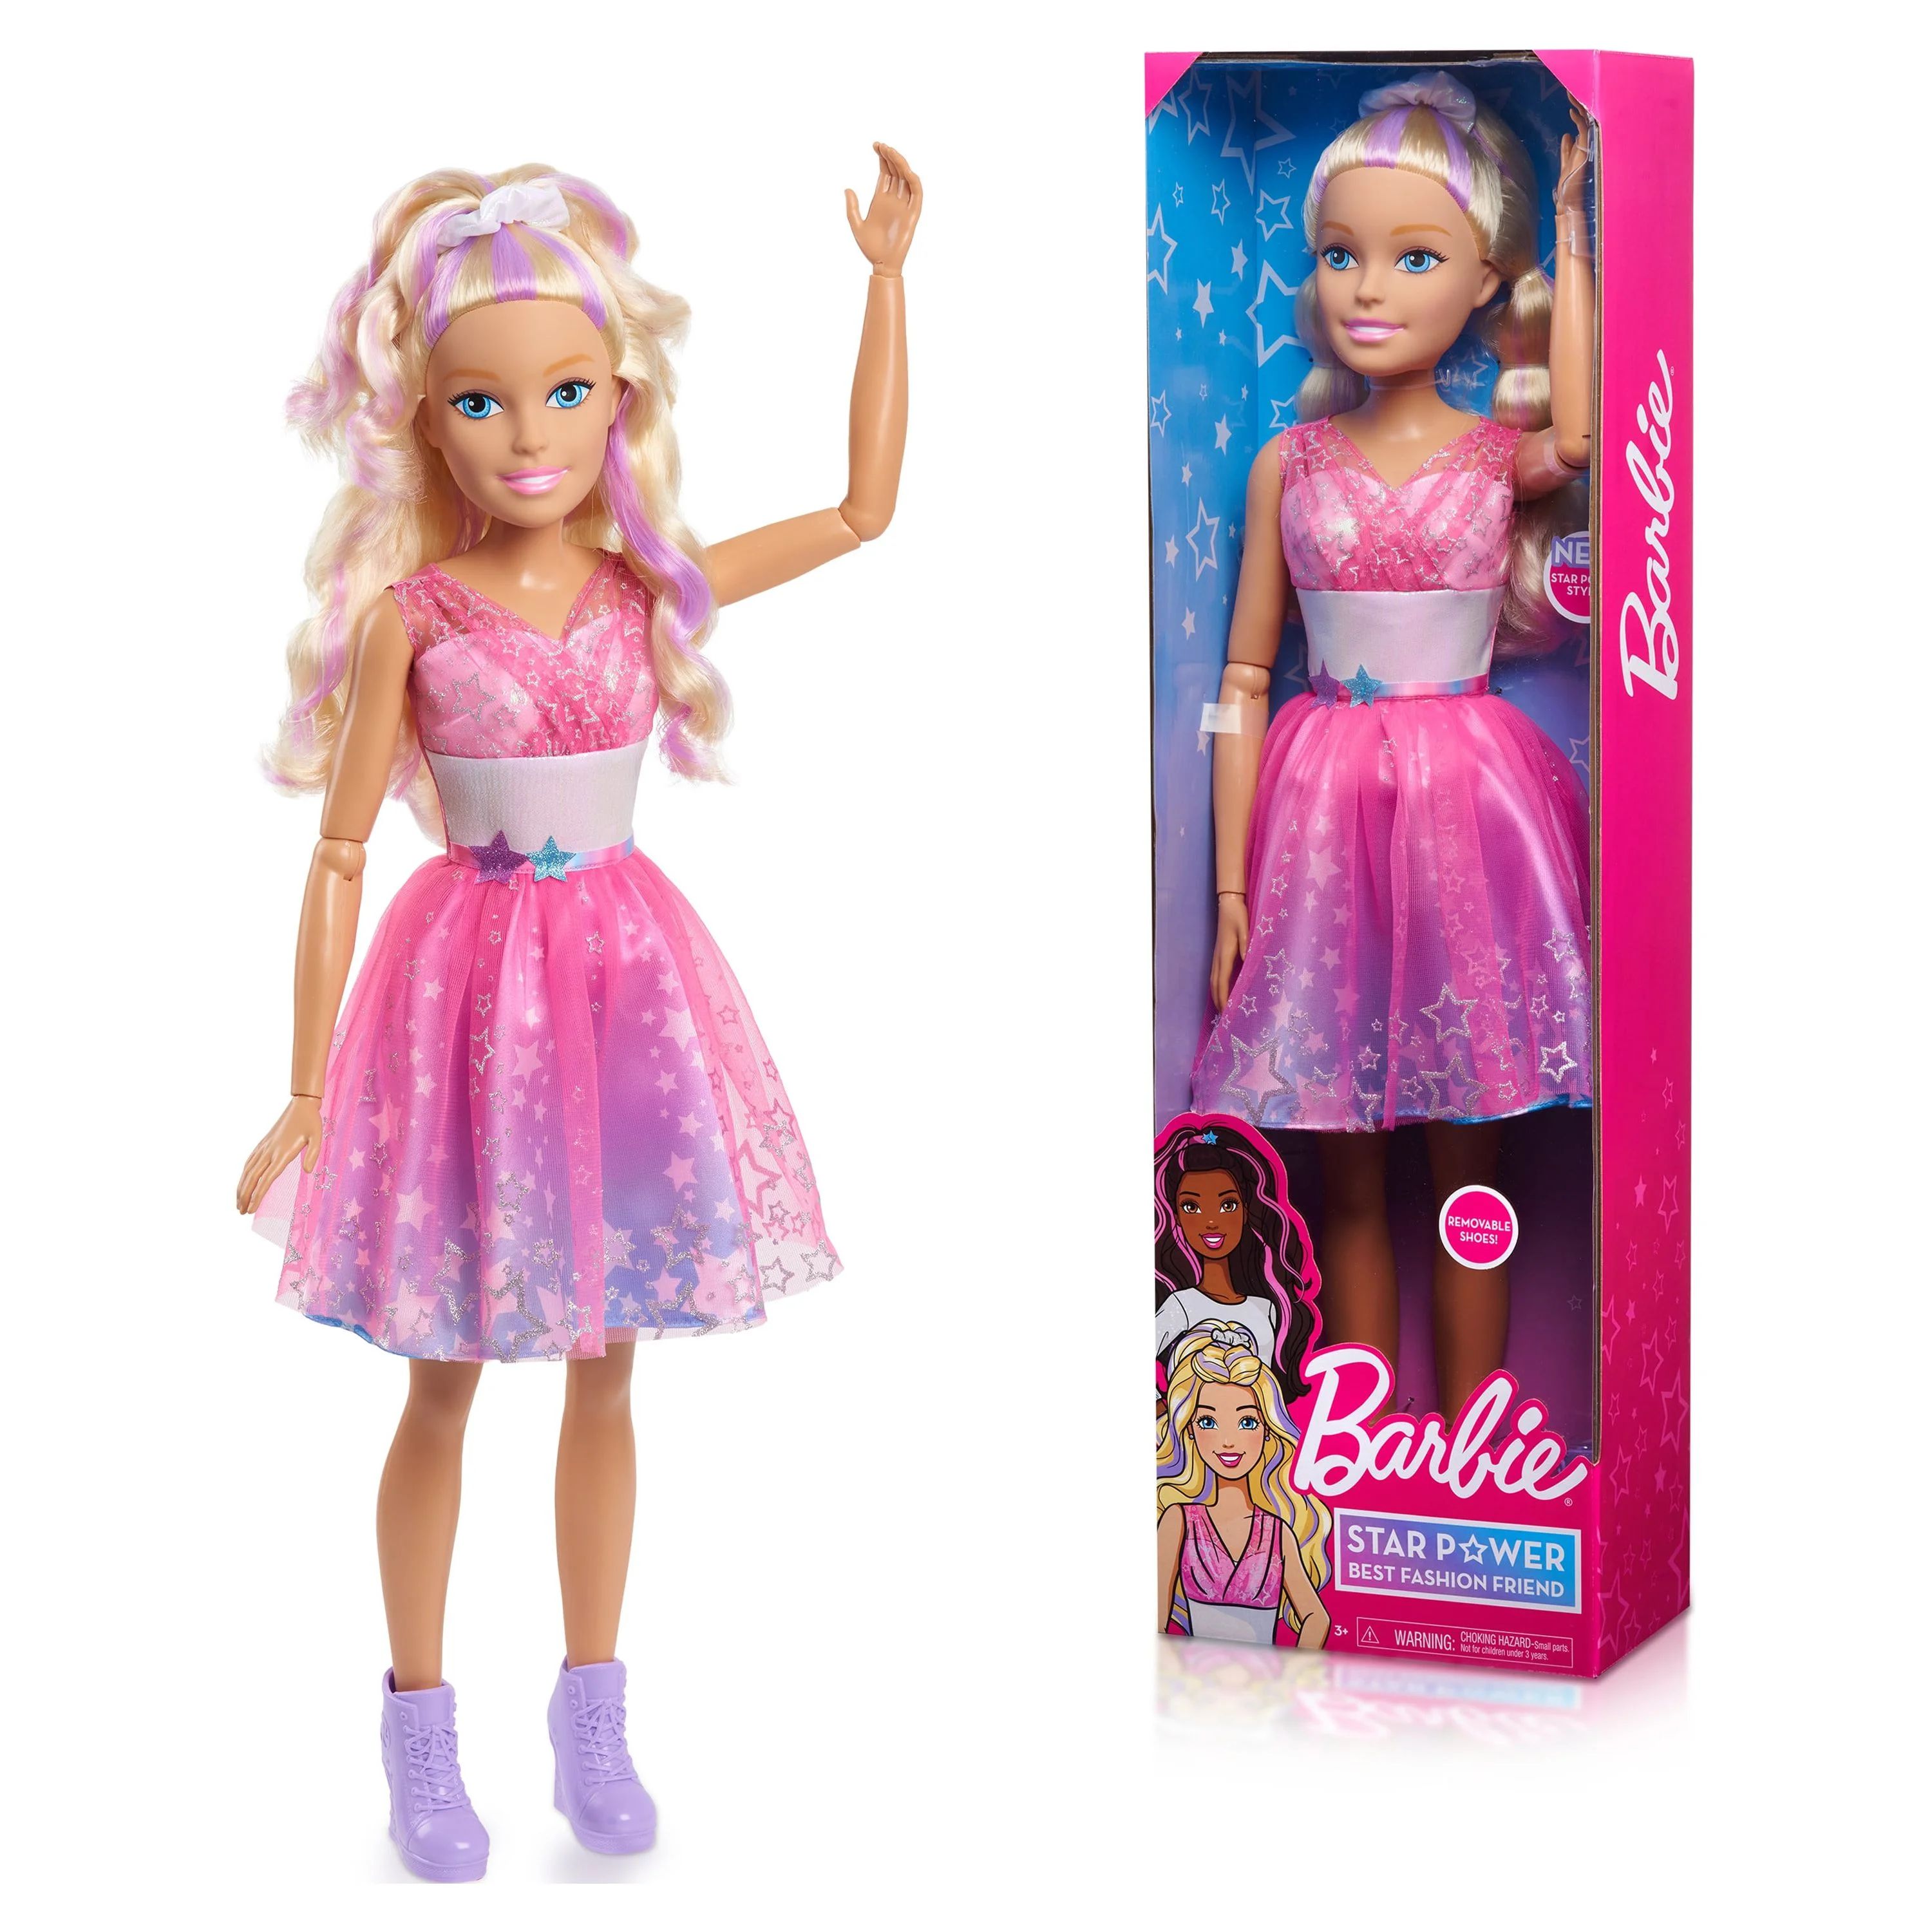 Barbie 28 inch Best Fashion Friend Star Power Doll, Blonde Hair, Kids Toys for Ages 3 up | Walmart (US)